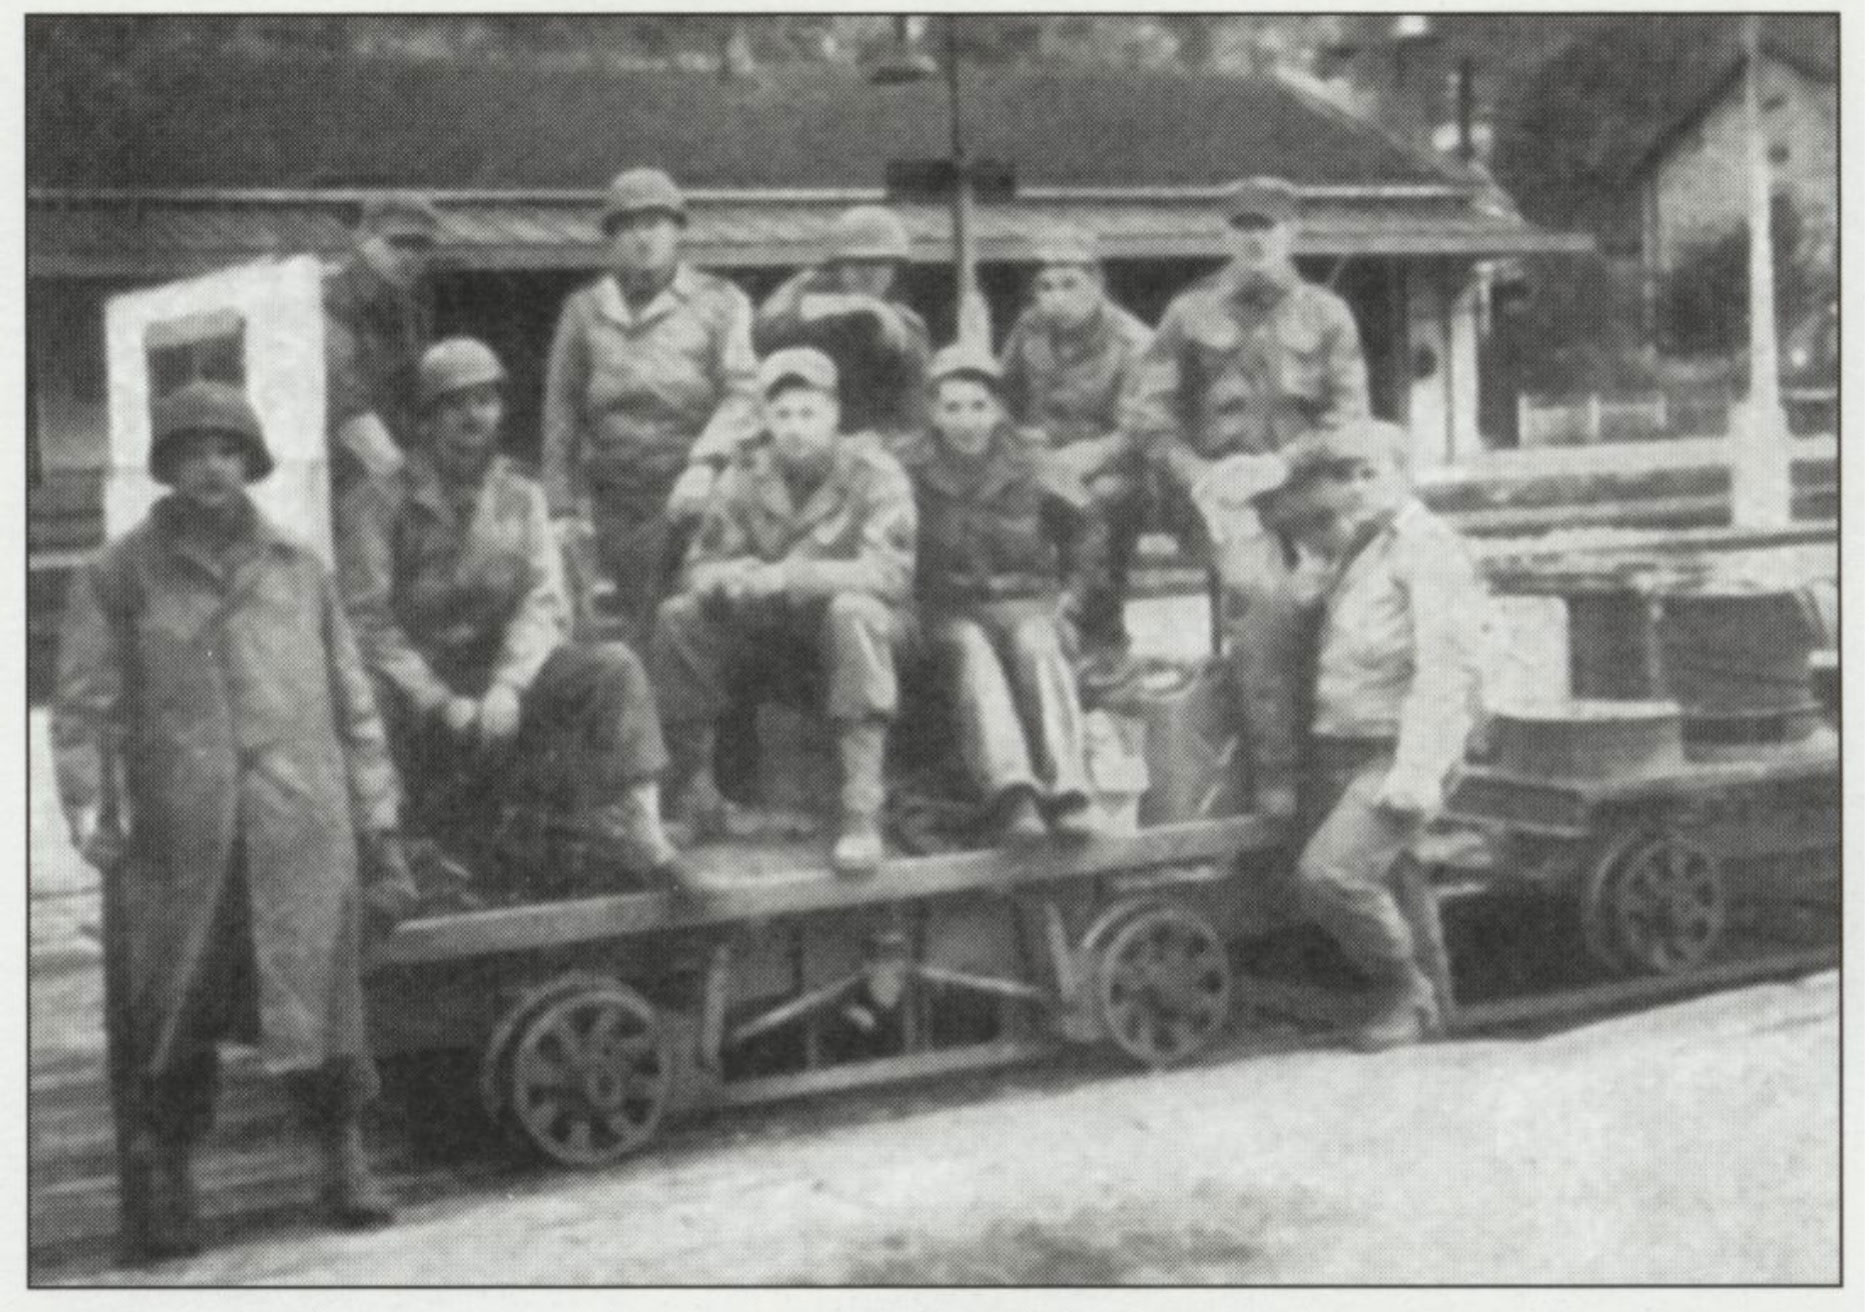 Some members the 718th signal platoon somewhere in France. Seated, from left to right, are Ervin Simpson, Sgt. George Adams, and Bill Moore. Note: All photos in this article, except where noted, come from History of the 718th ROB Transportation Corps.